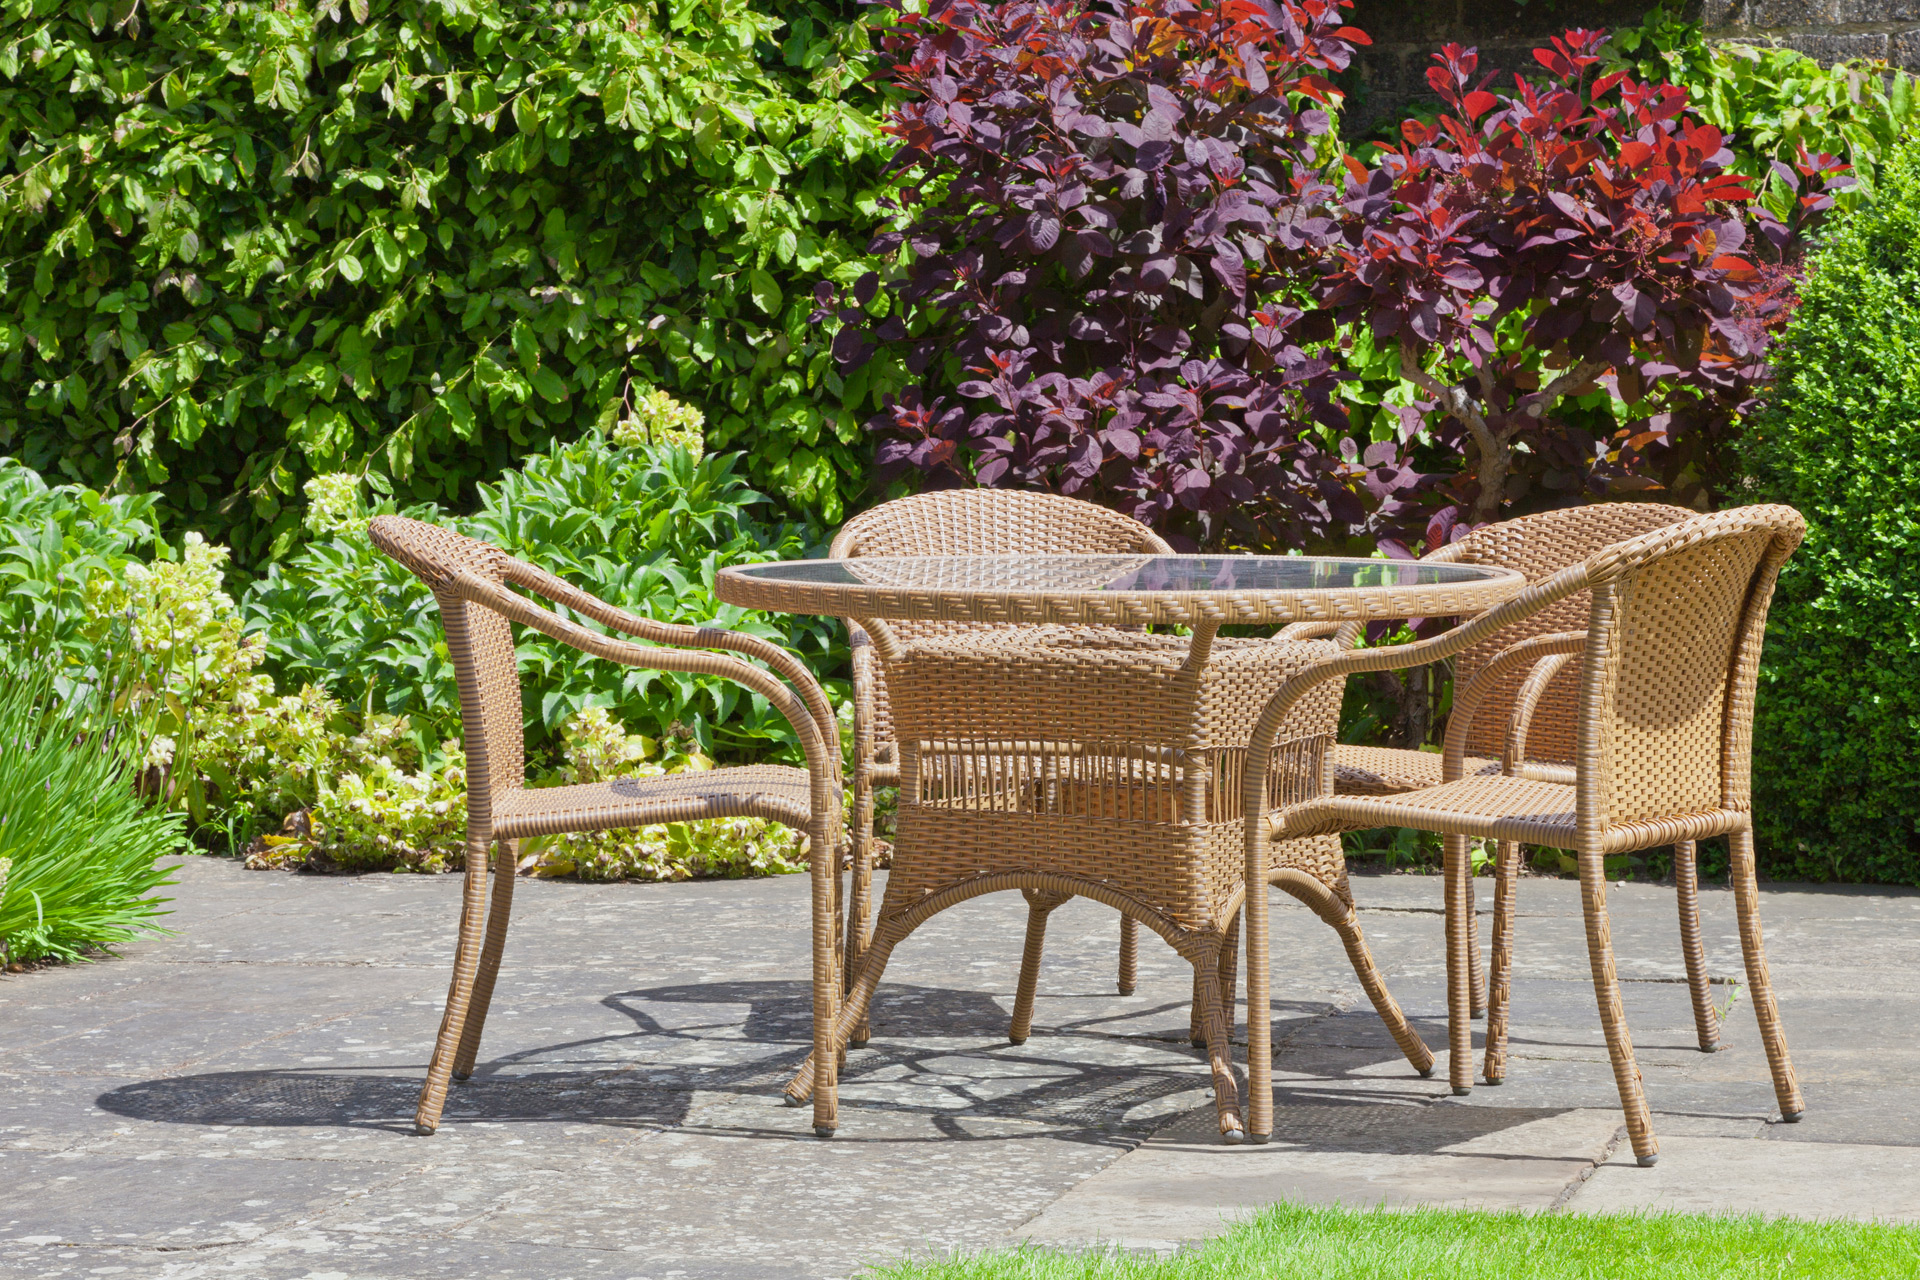 Wicker garden furniture with hedges in the background